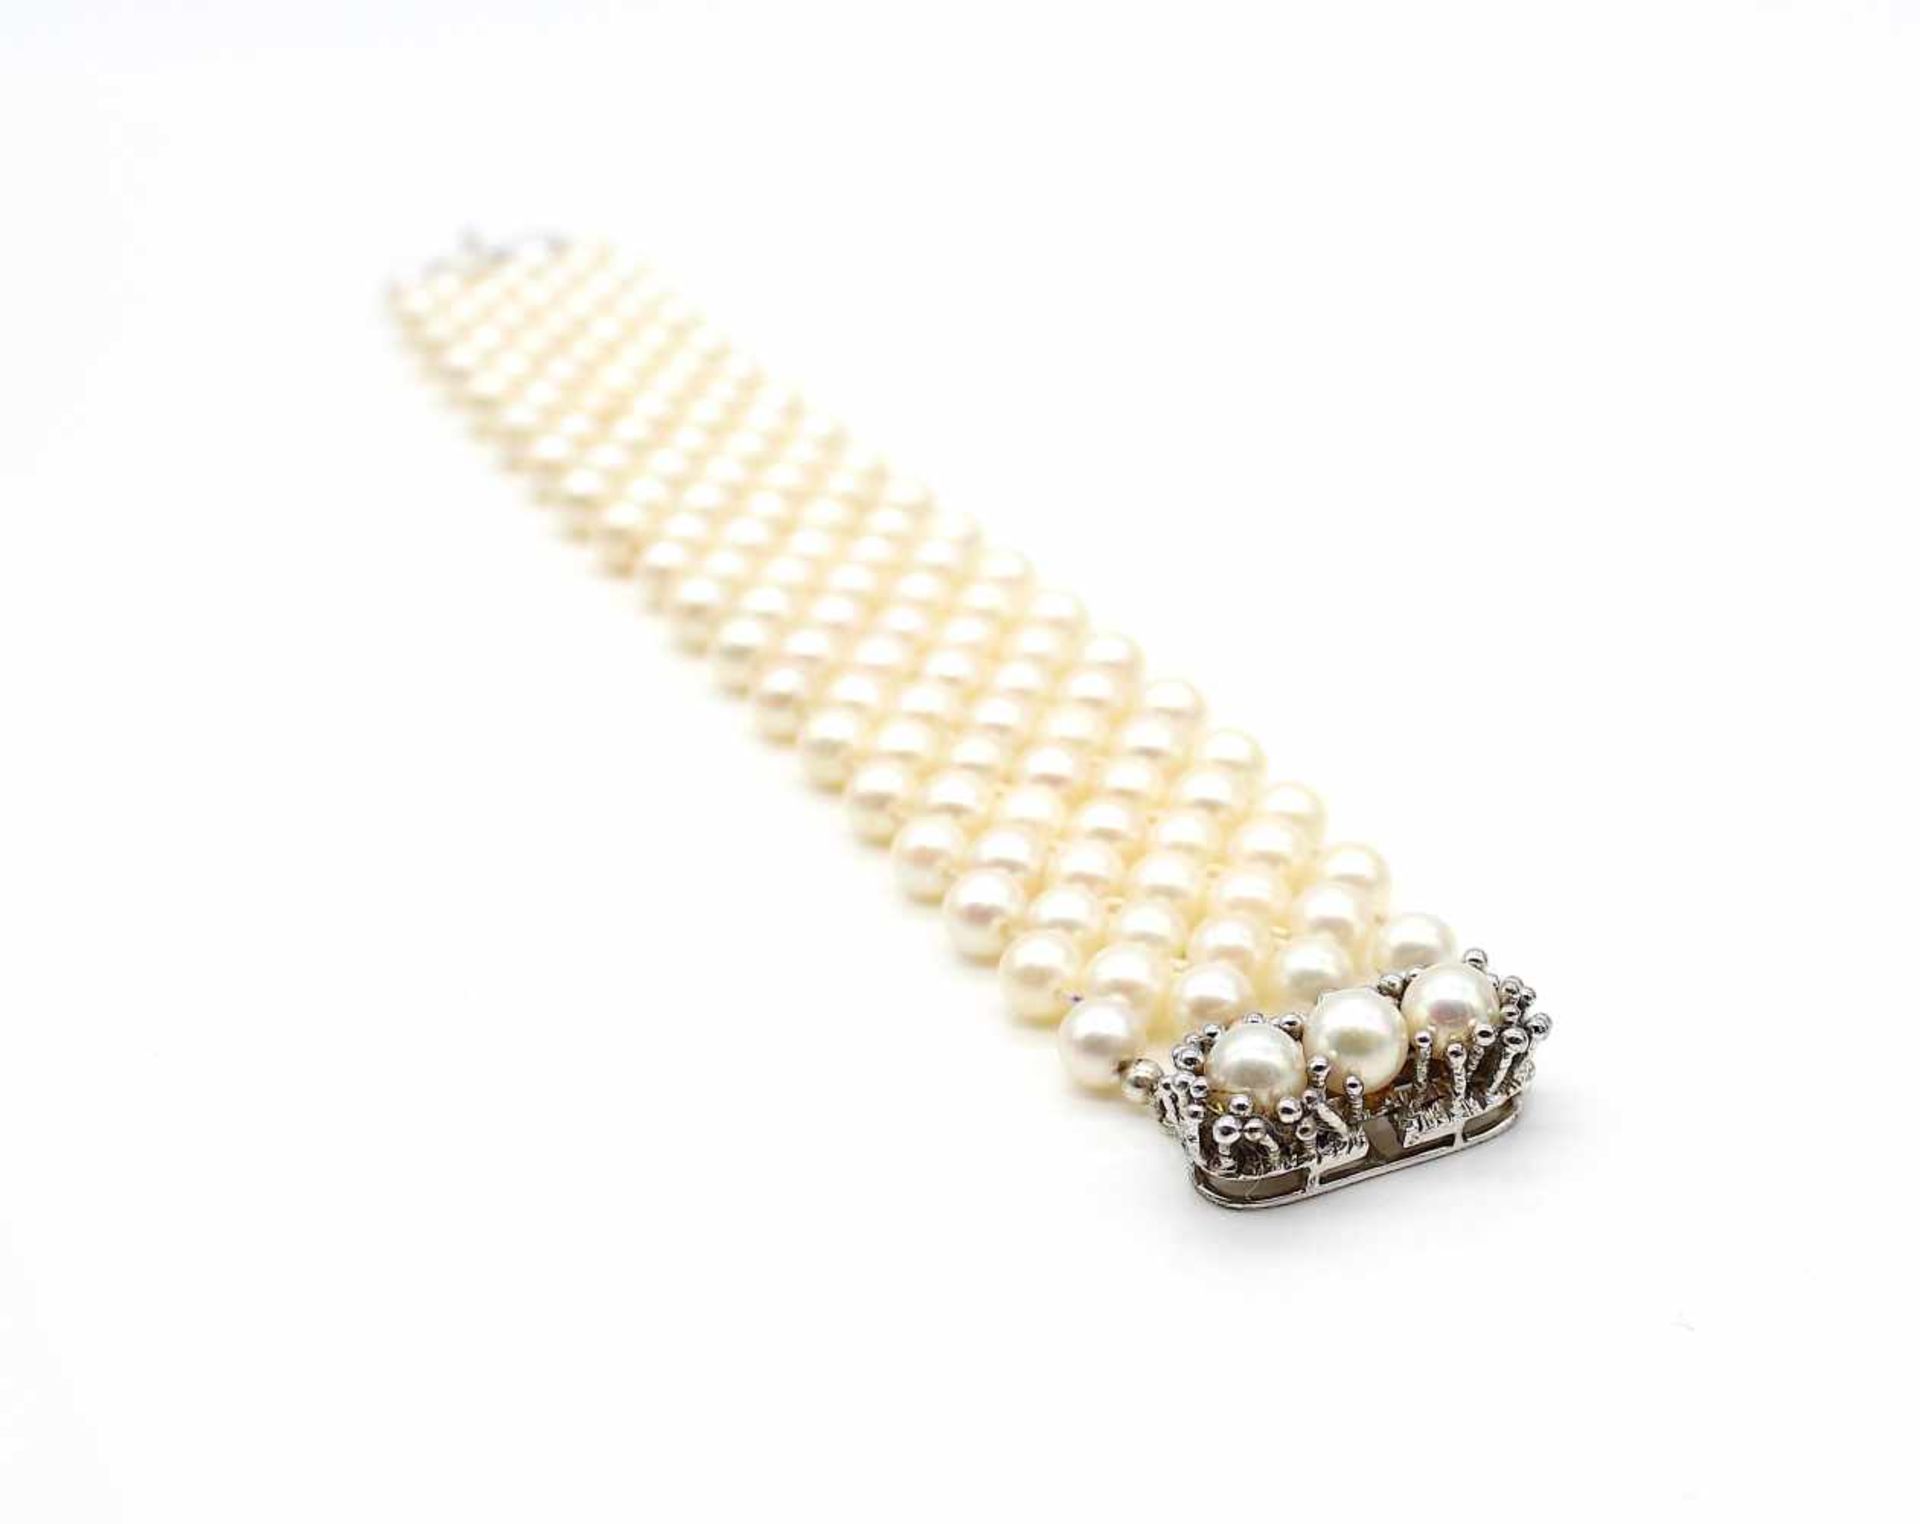 Bracelet made of cultured pearls with a lock made of 585 white gold.weight 53,2 g, length 20